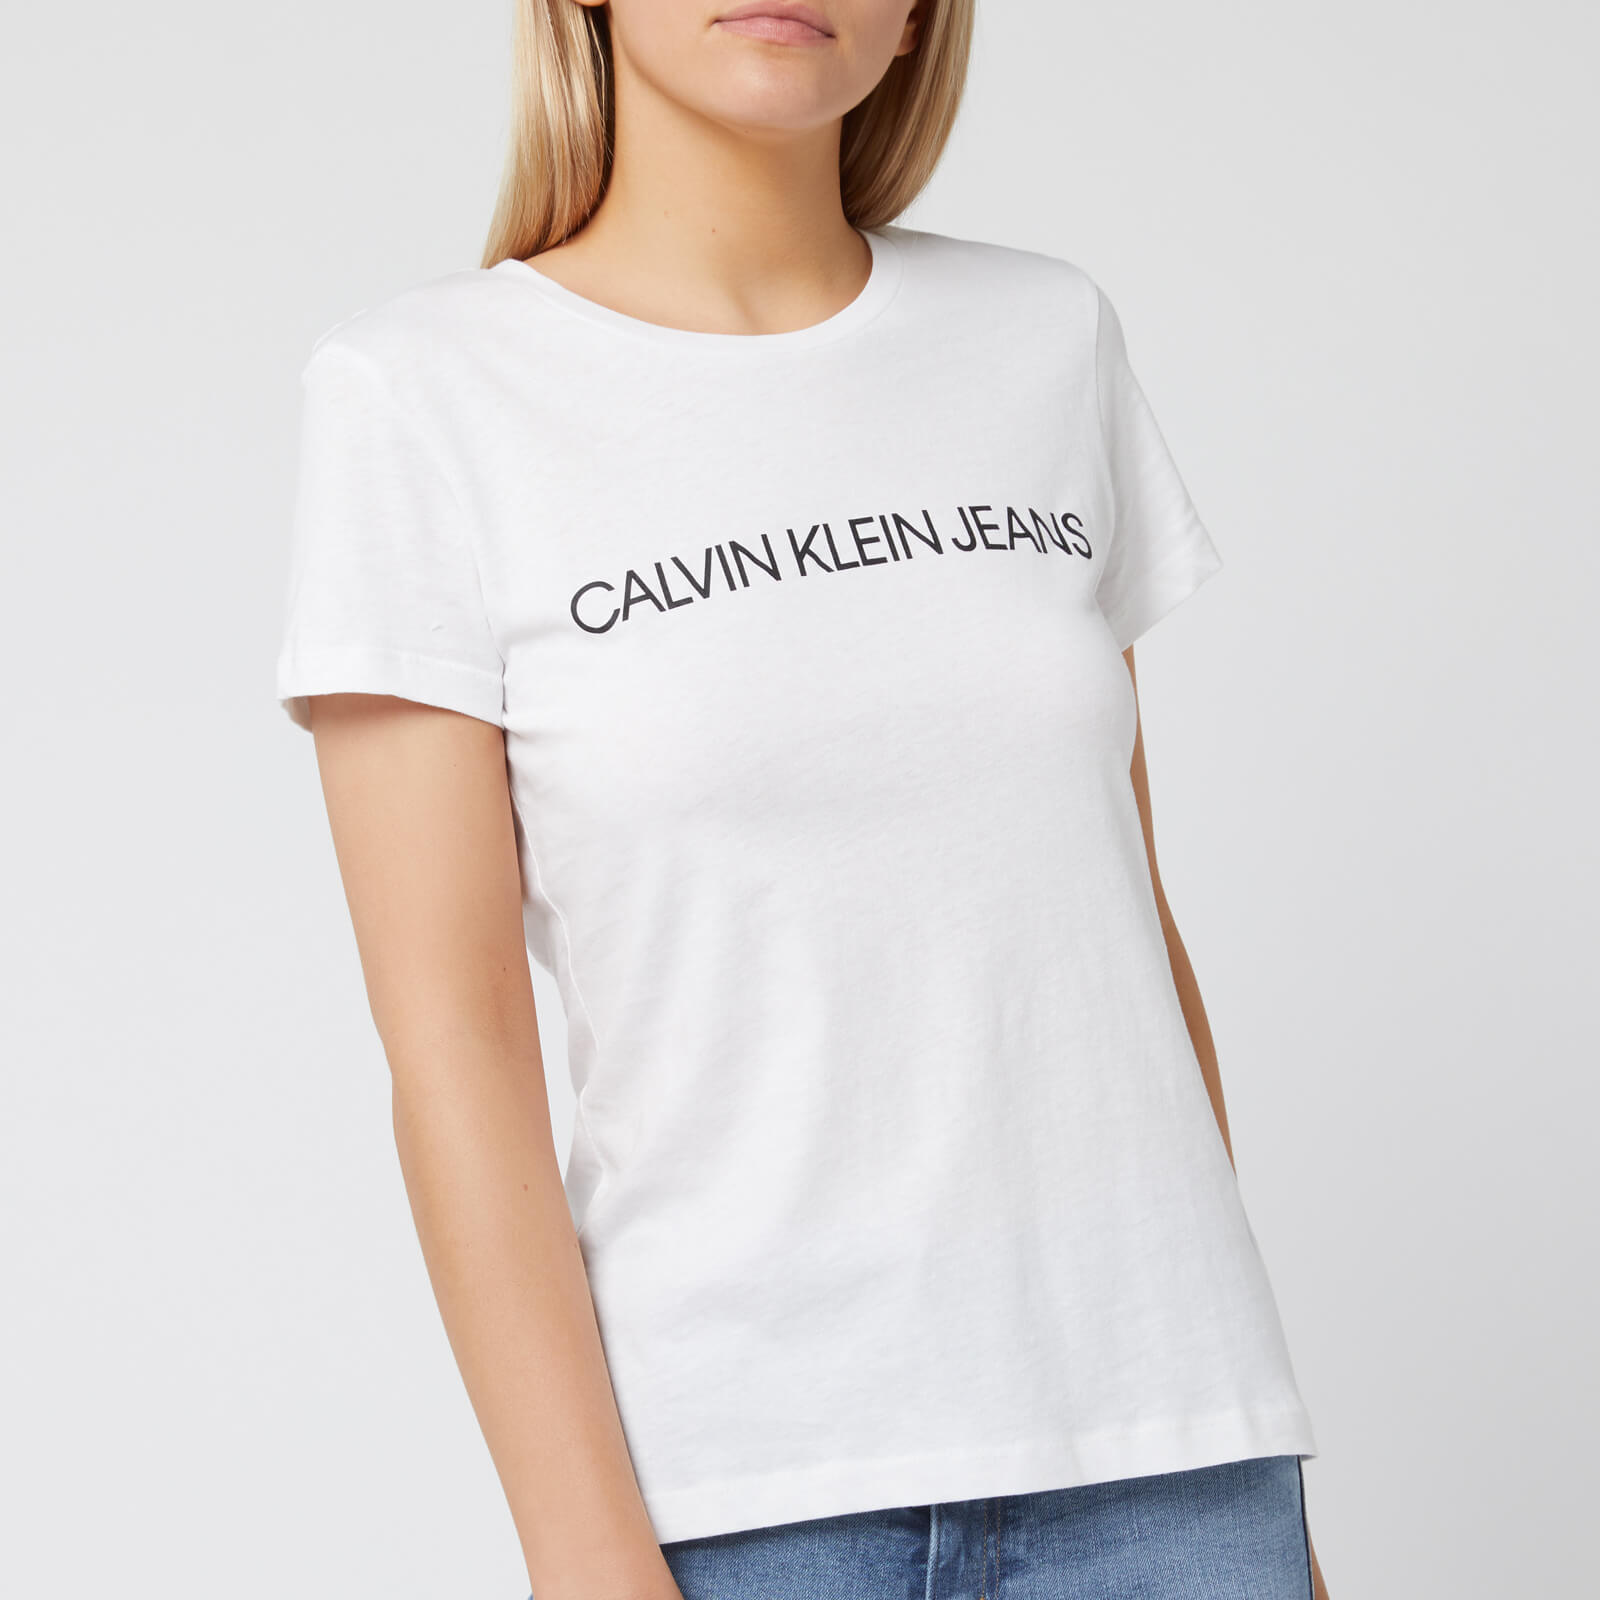 Image of Calvin Klein Jeans Women's Institutional Logo Slim Fit T-Shirt - Bright White - S